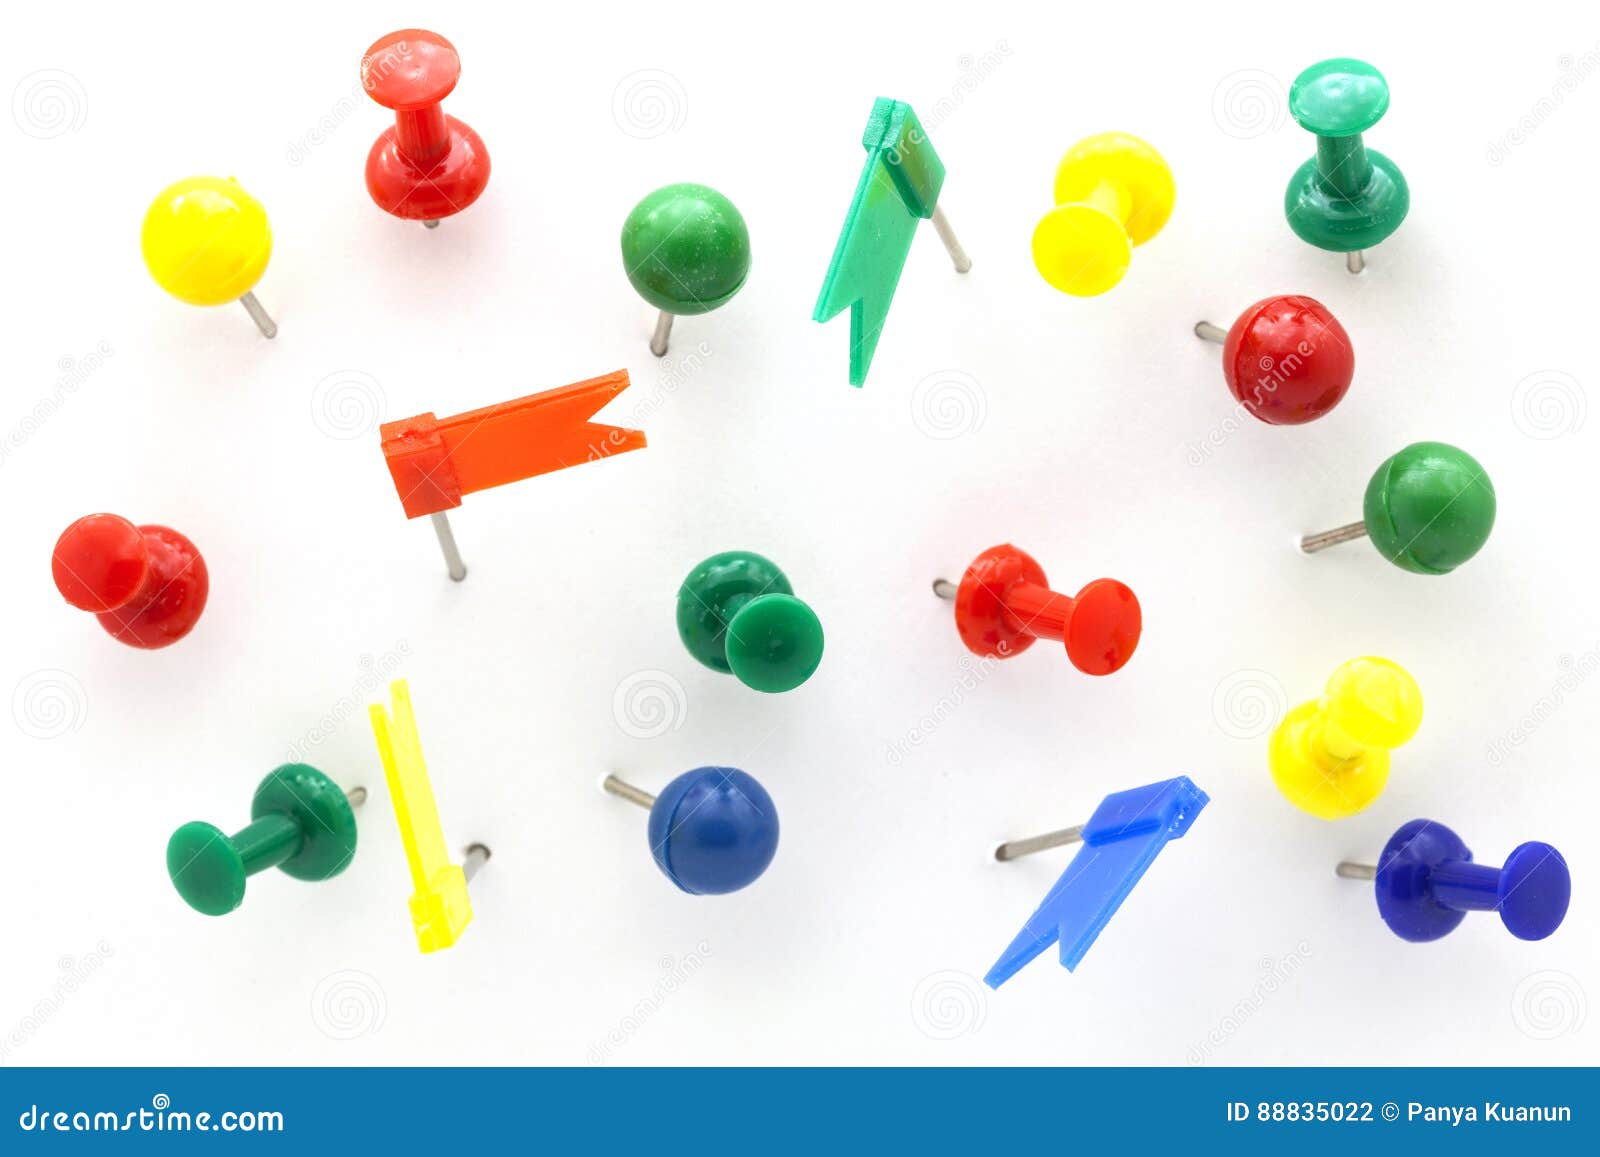 set of colorful color push pins top view  on white background.